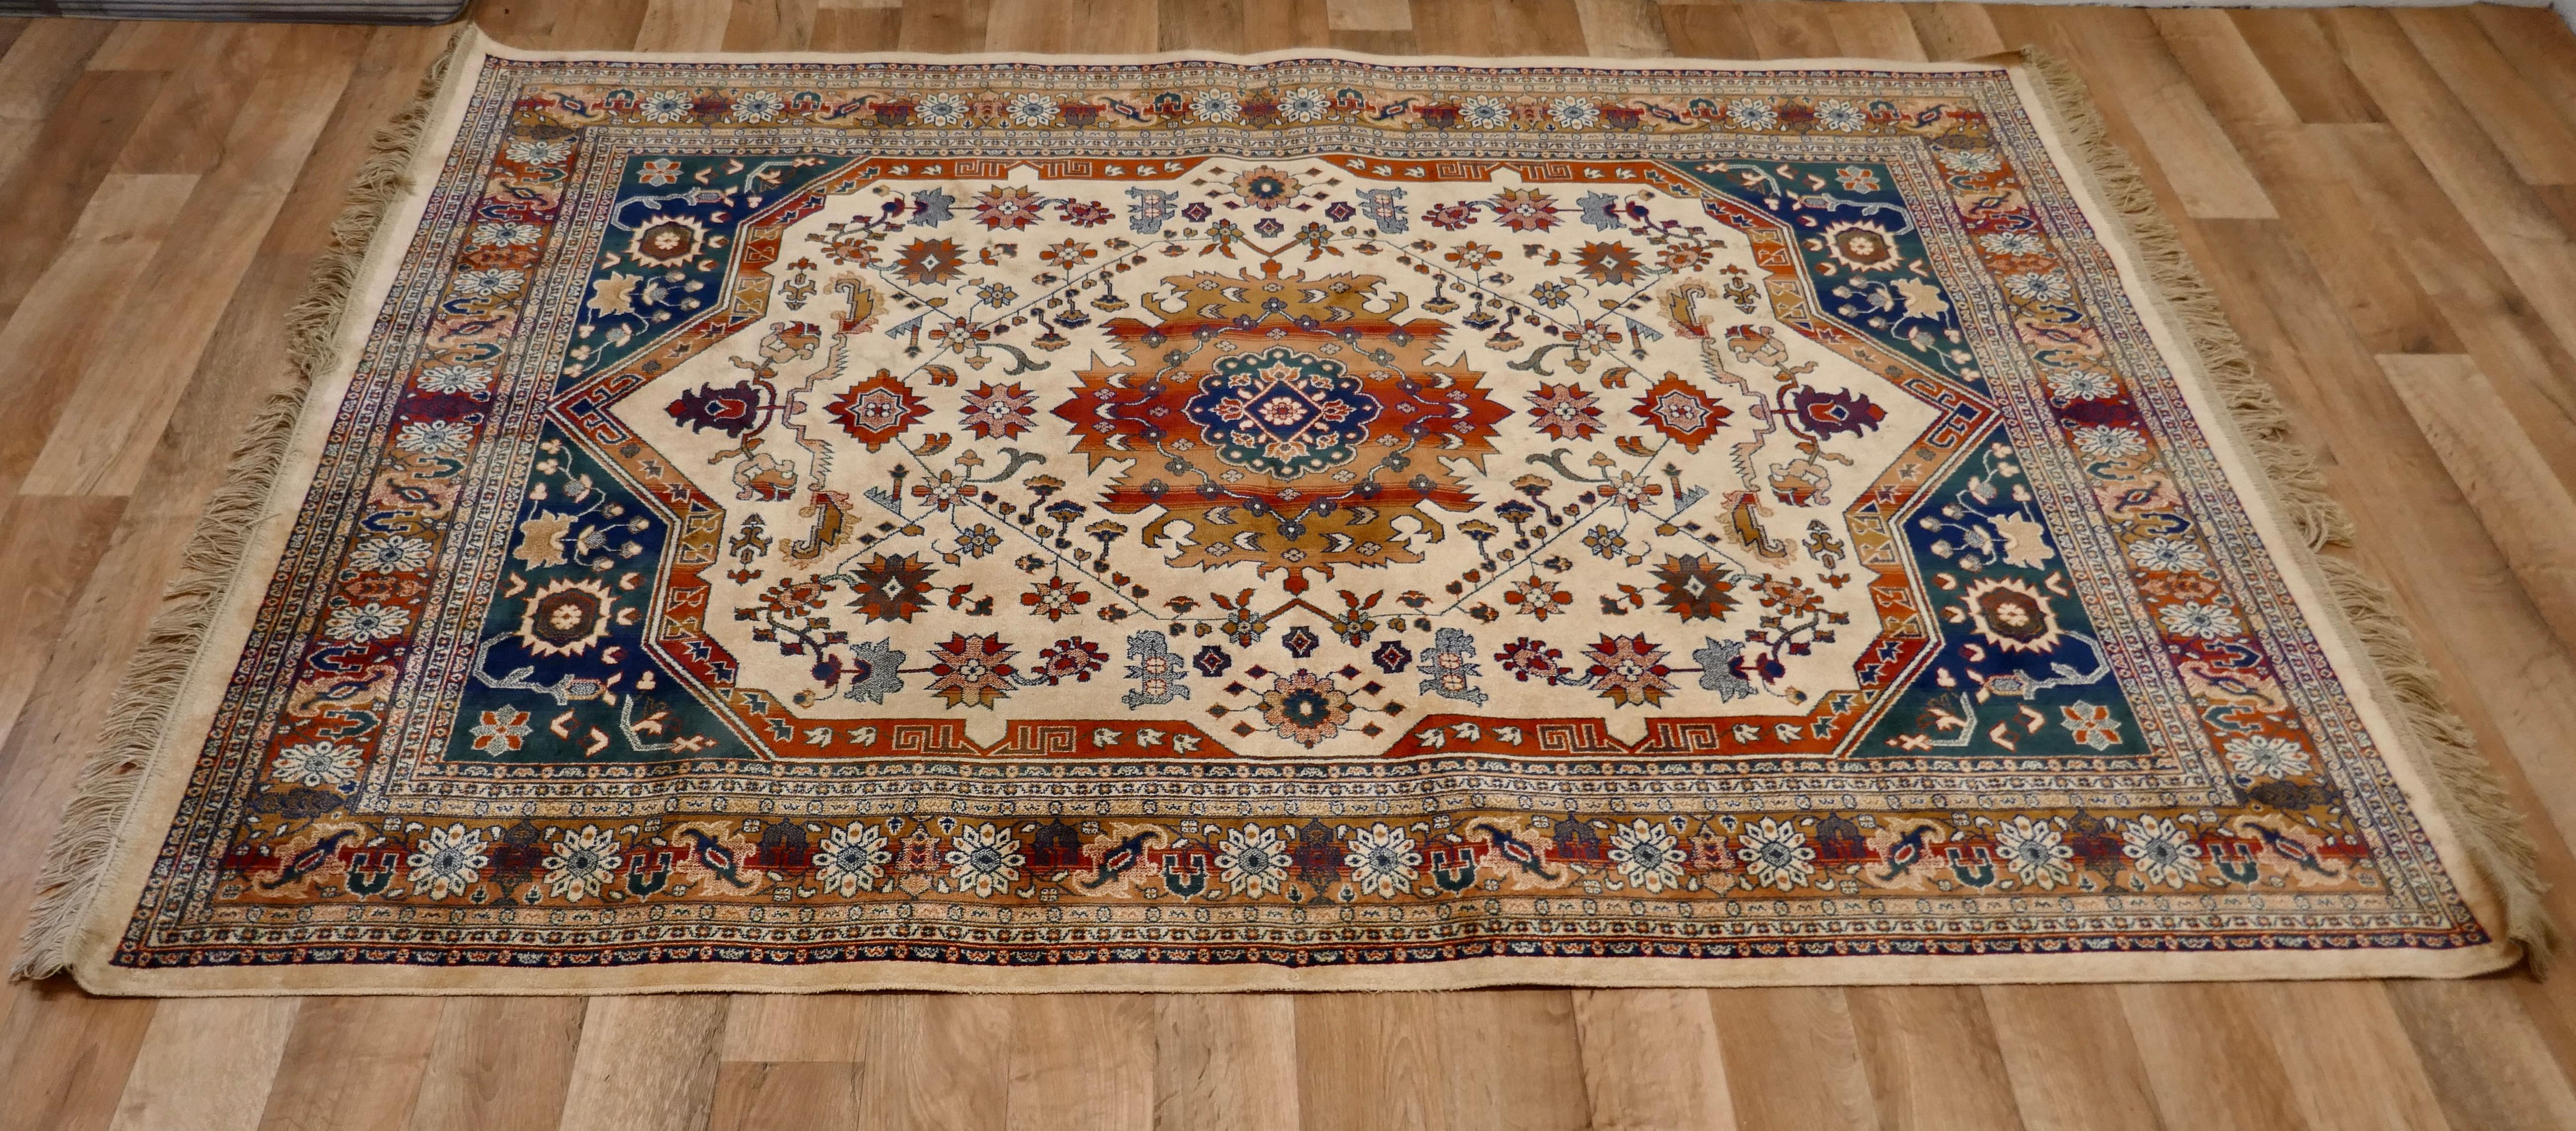 A beautiful traditional tree of life silk rug

The symmetrical centre panel of this intricate and luscious rug focuses on the iconic tree of life pattern 
This silk rug measures 84” x 55” it is in good bright condition 
AC185.